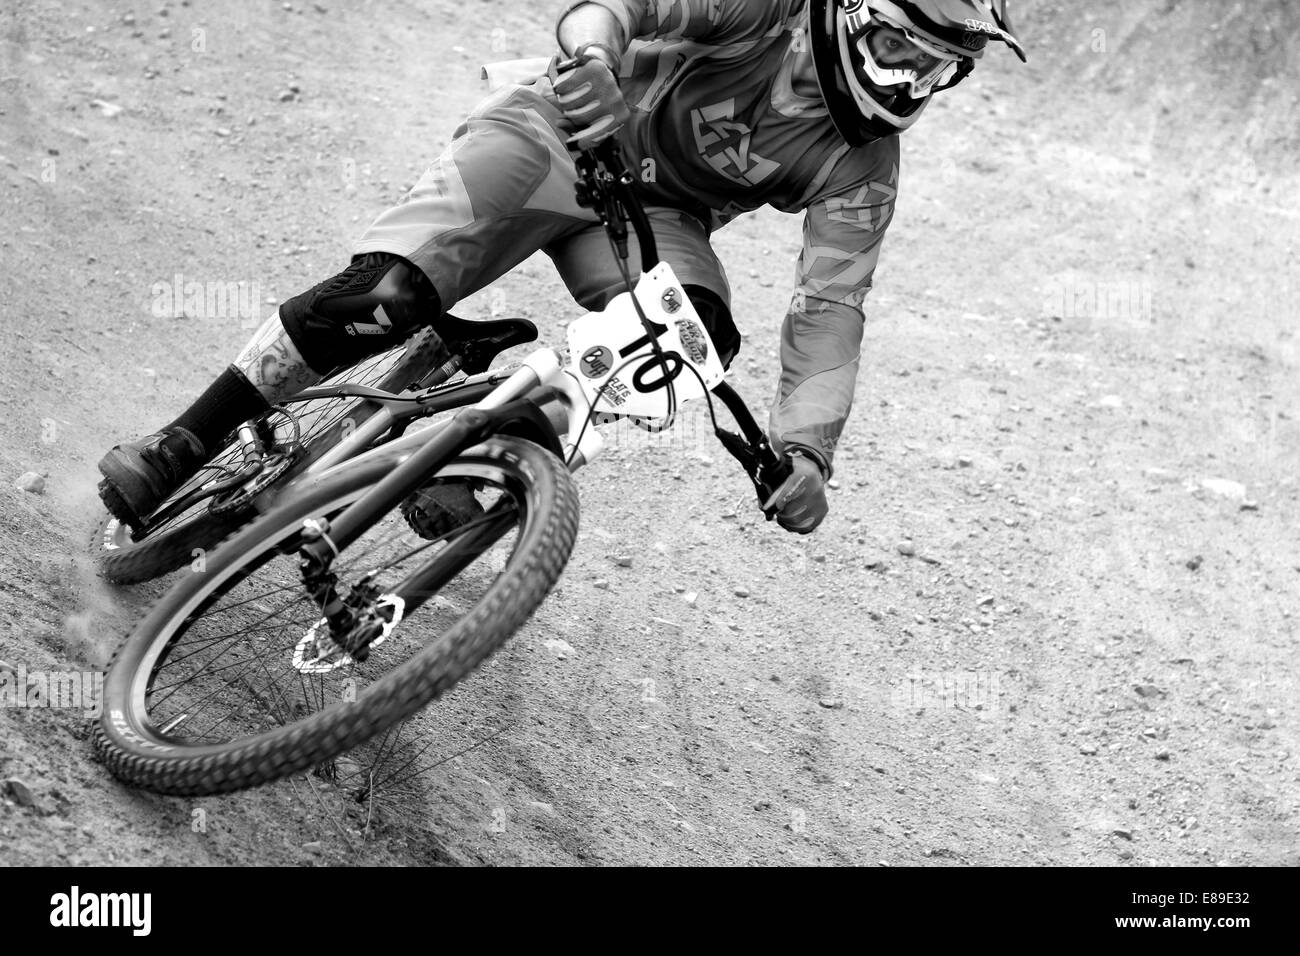 4X Four Cross Competition Fort William June 2014 - Rider Unknown Stock Photo